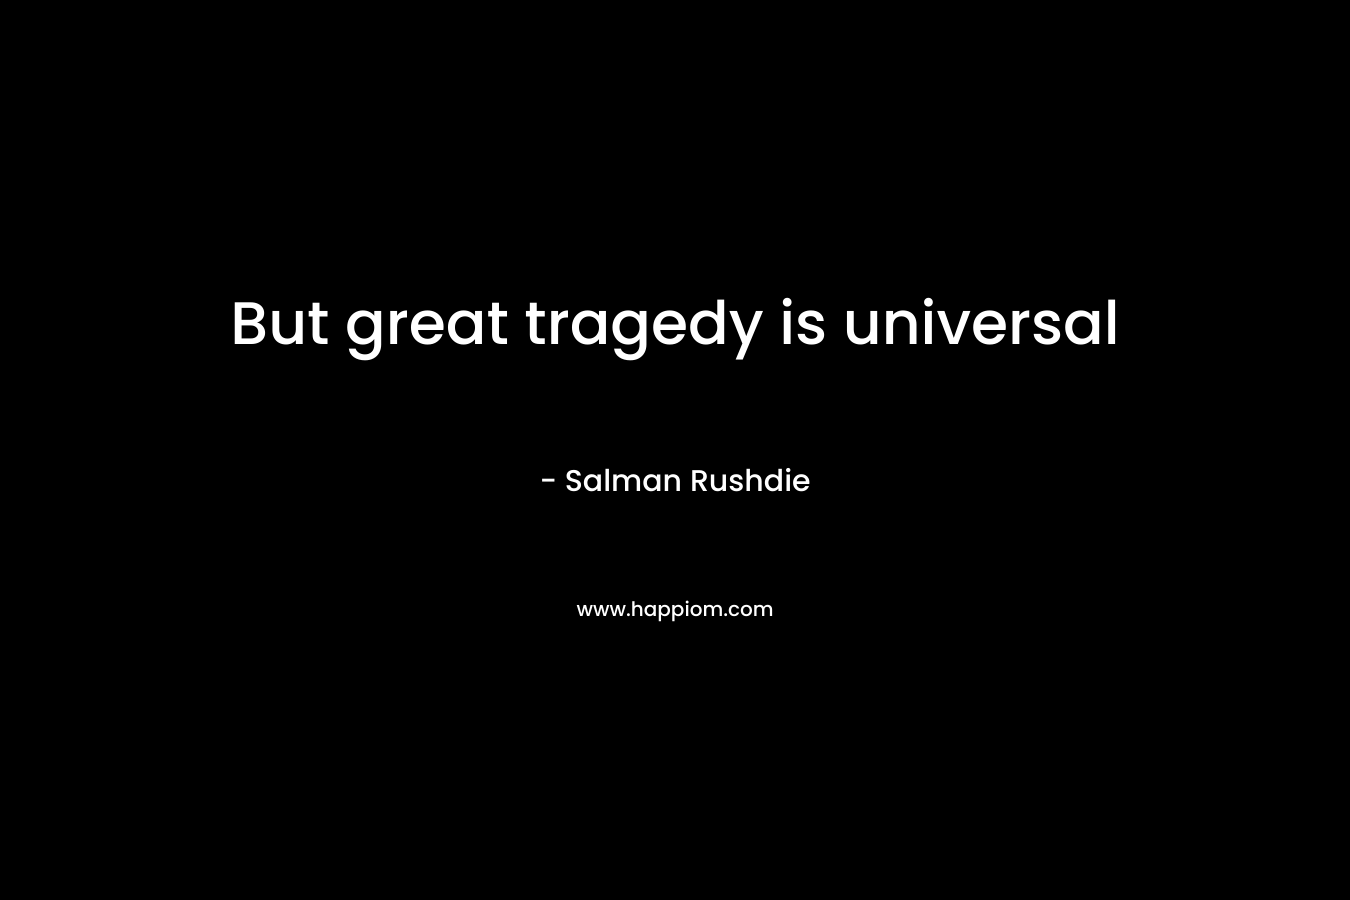 But great tragedy is universal